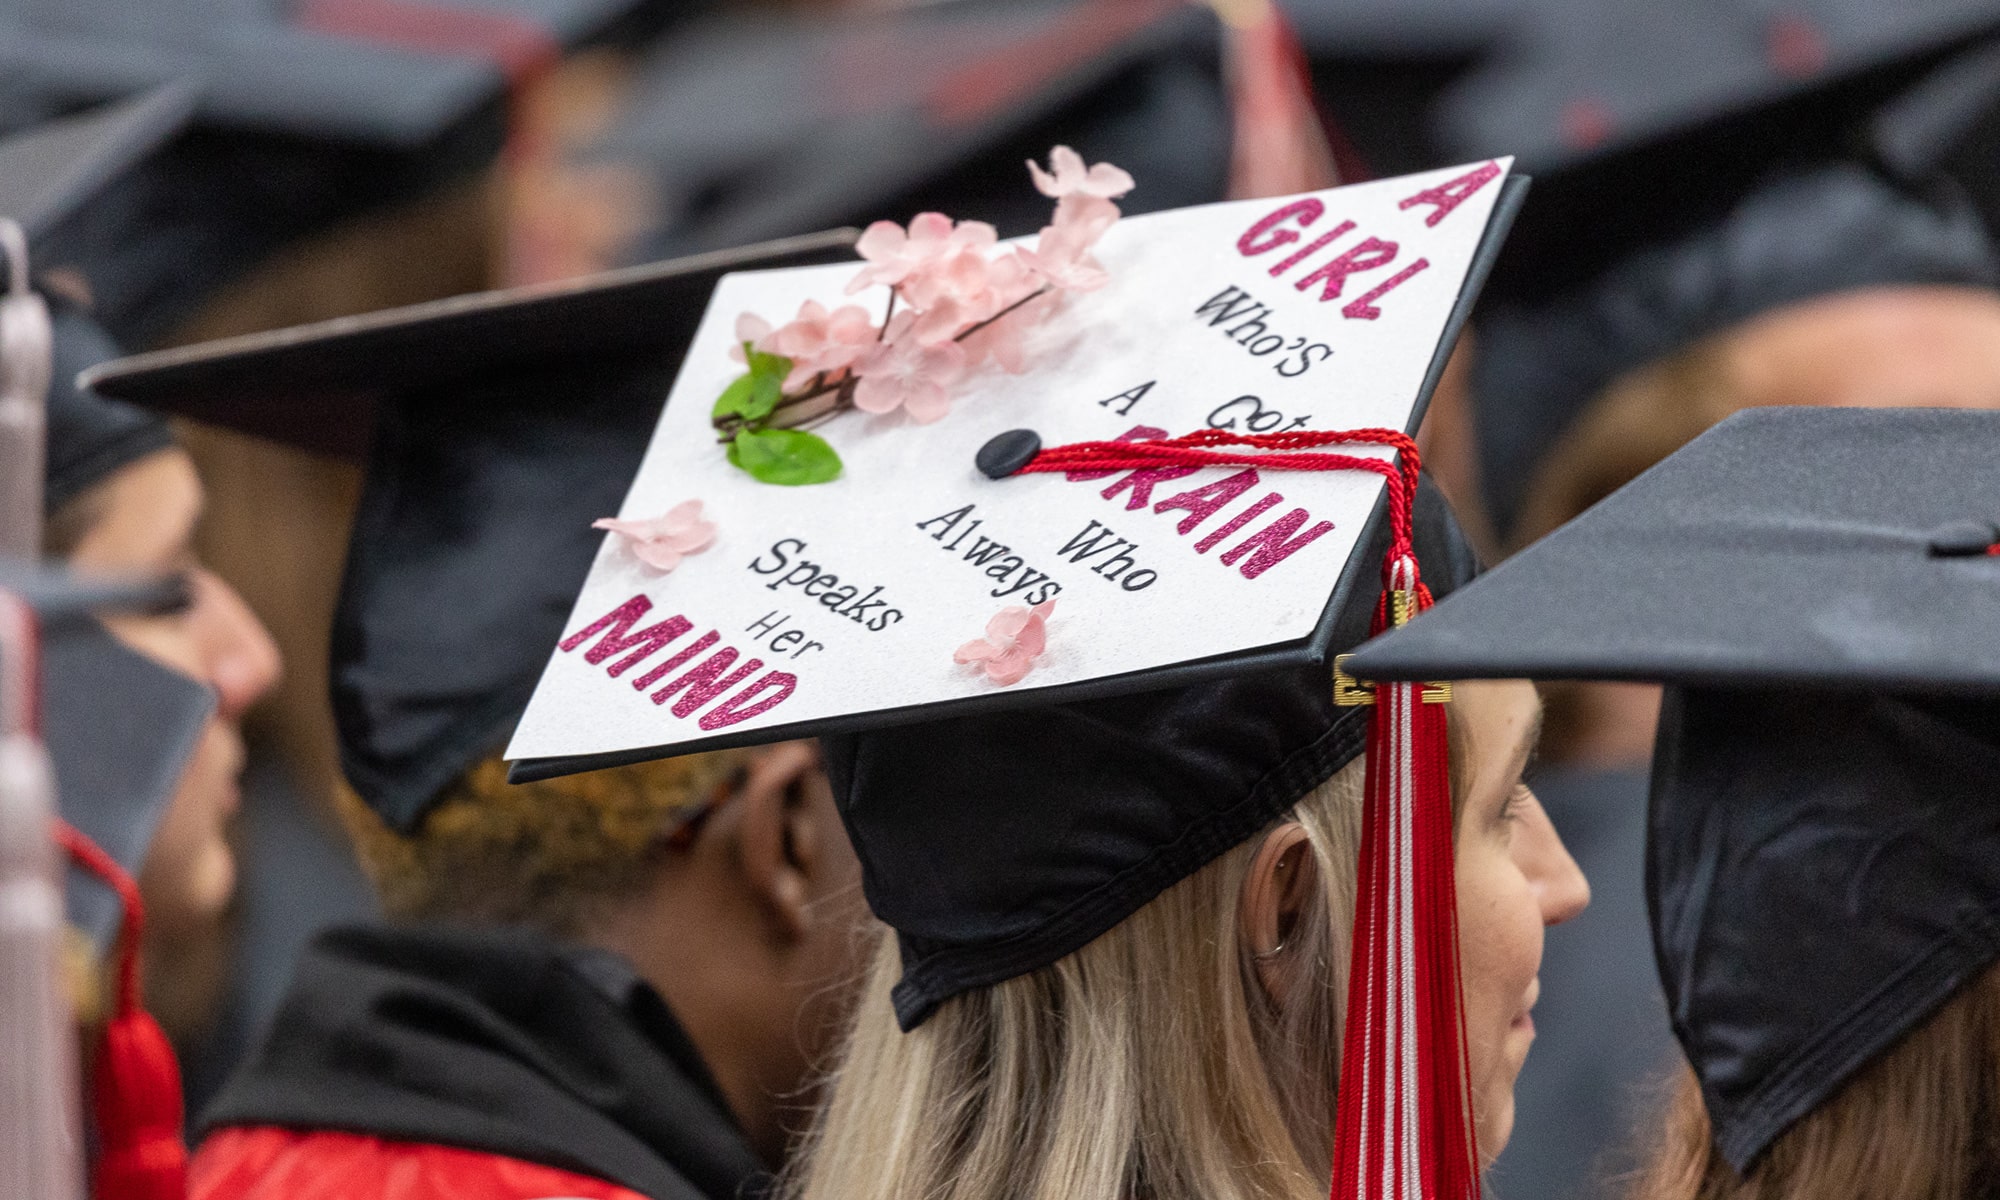 Student graduation cap decorated with flowers that reads 'A girl who's got a brain who always speaks her mind'